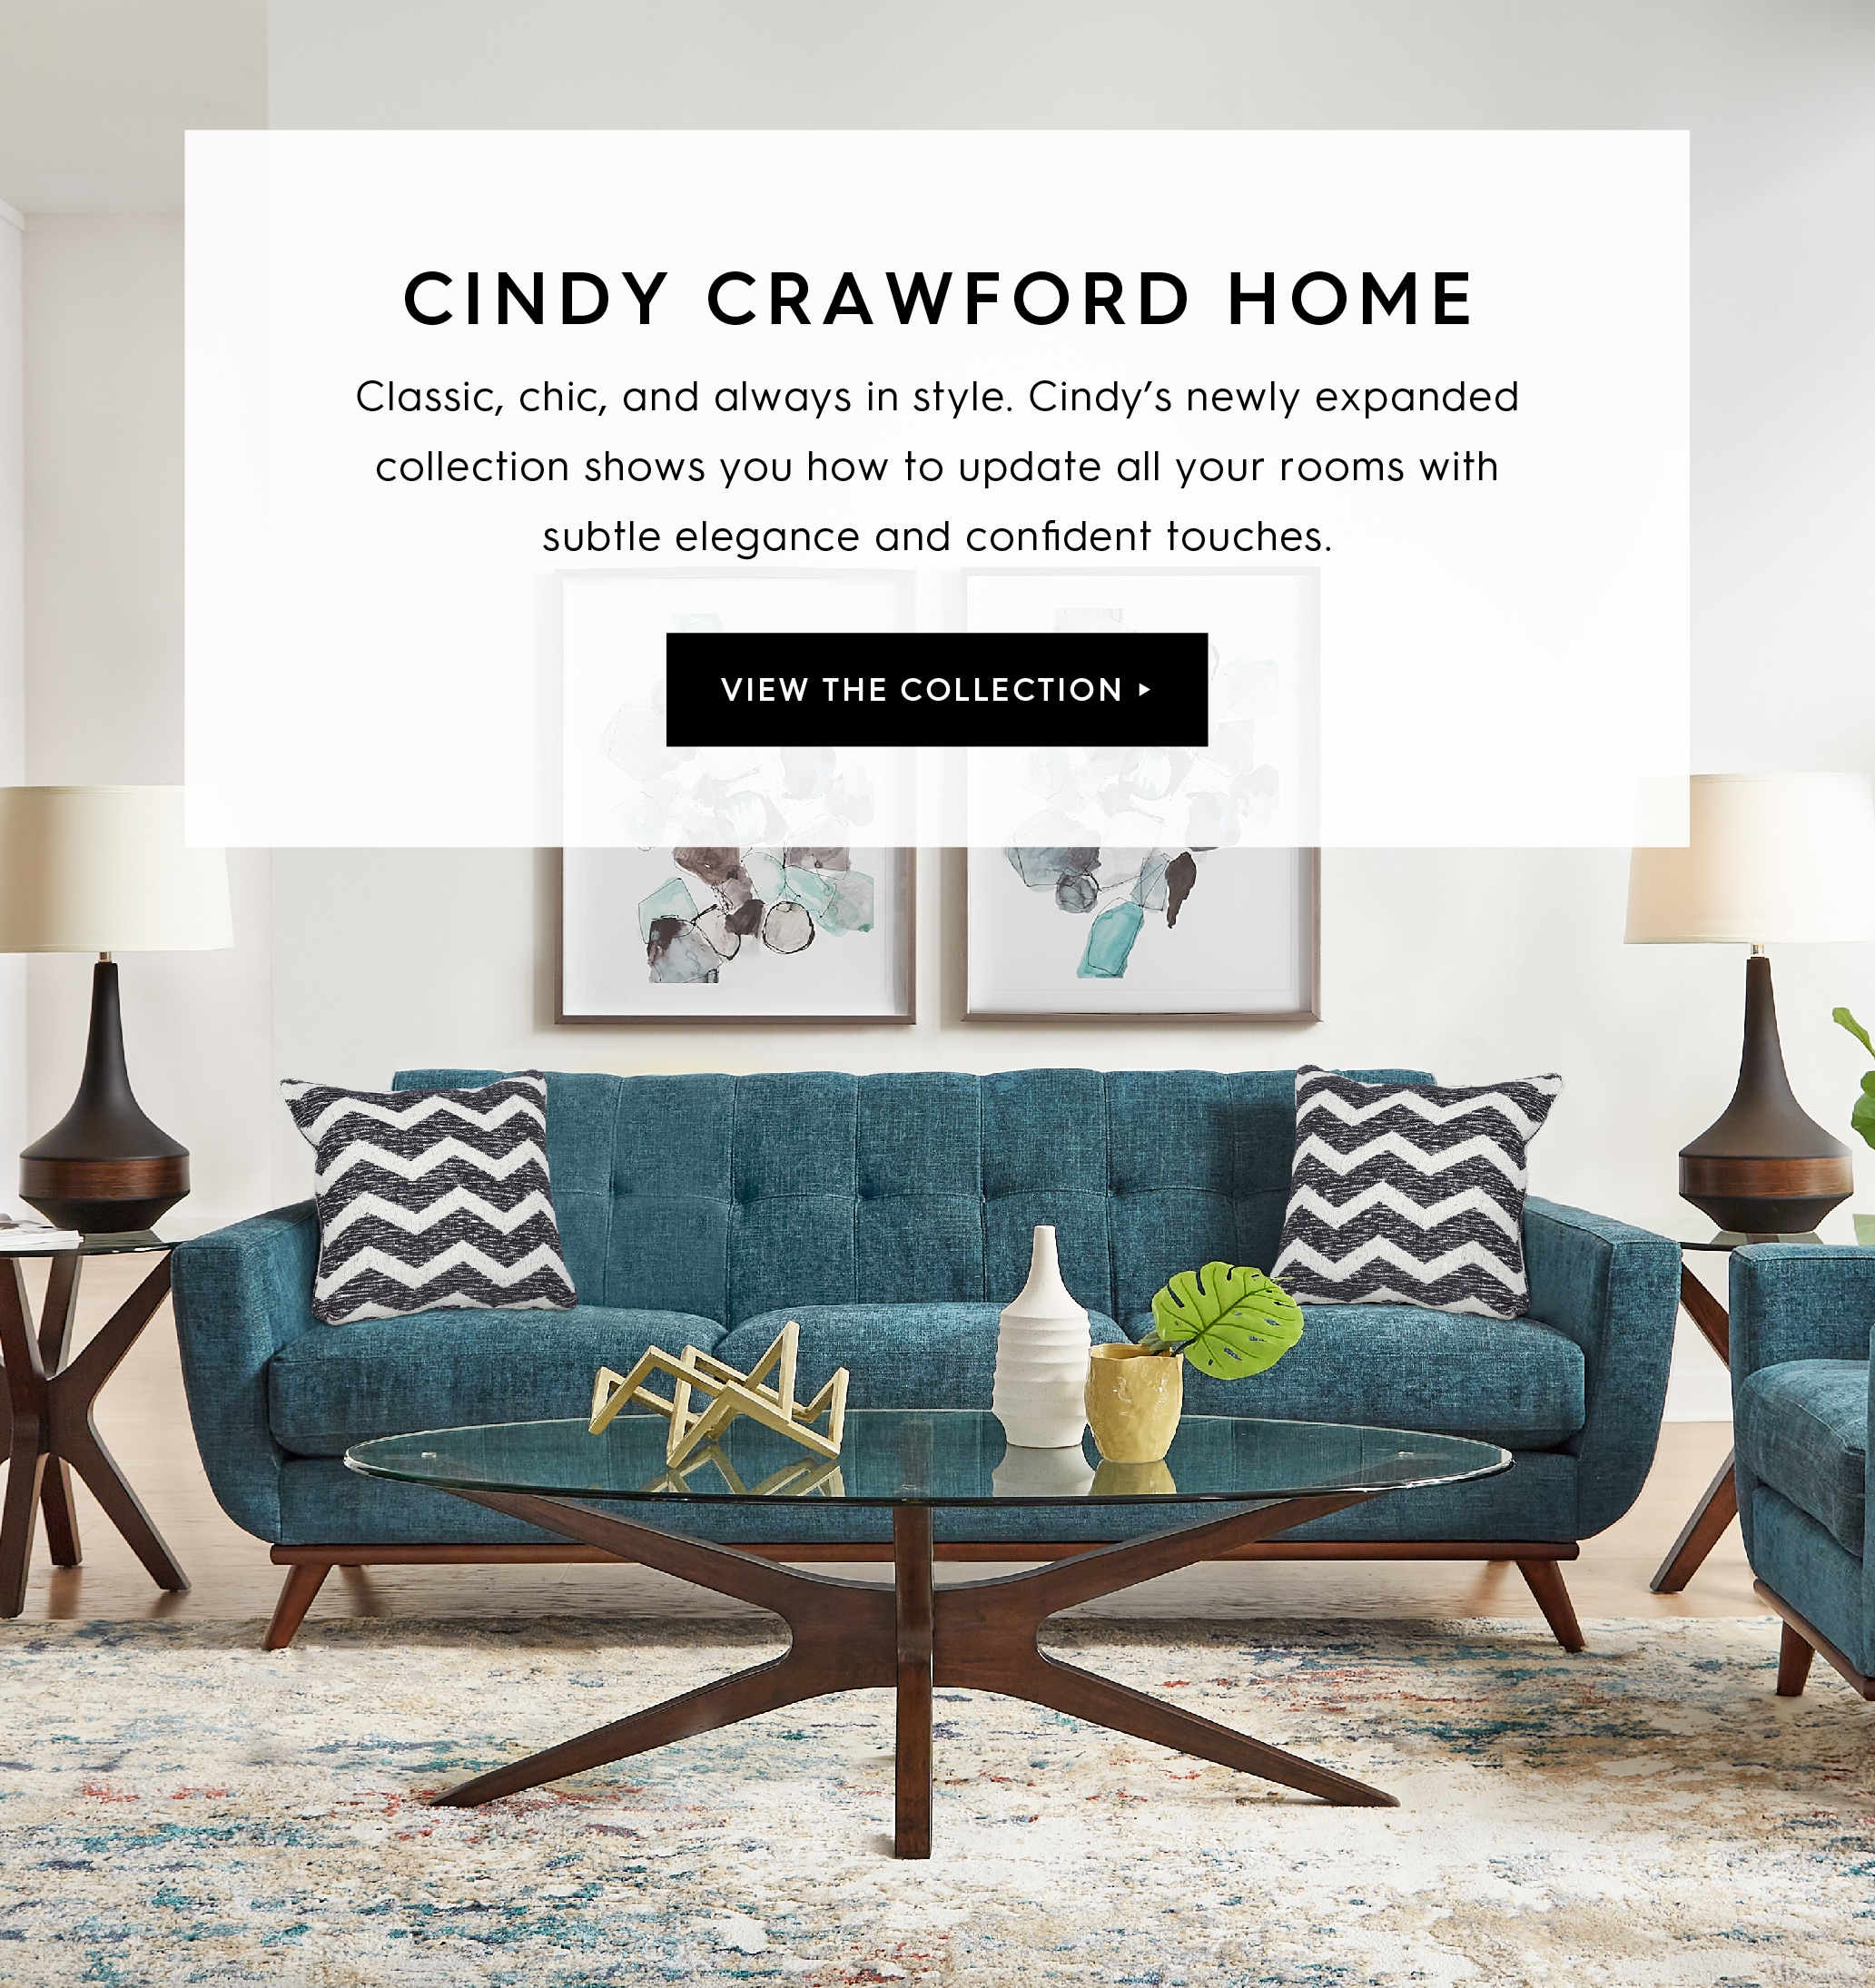 Explore the Cindy Crawford Home Collection.